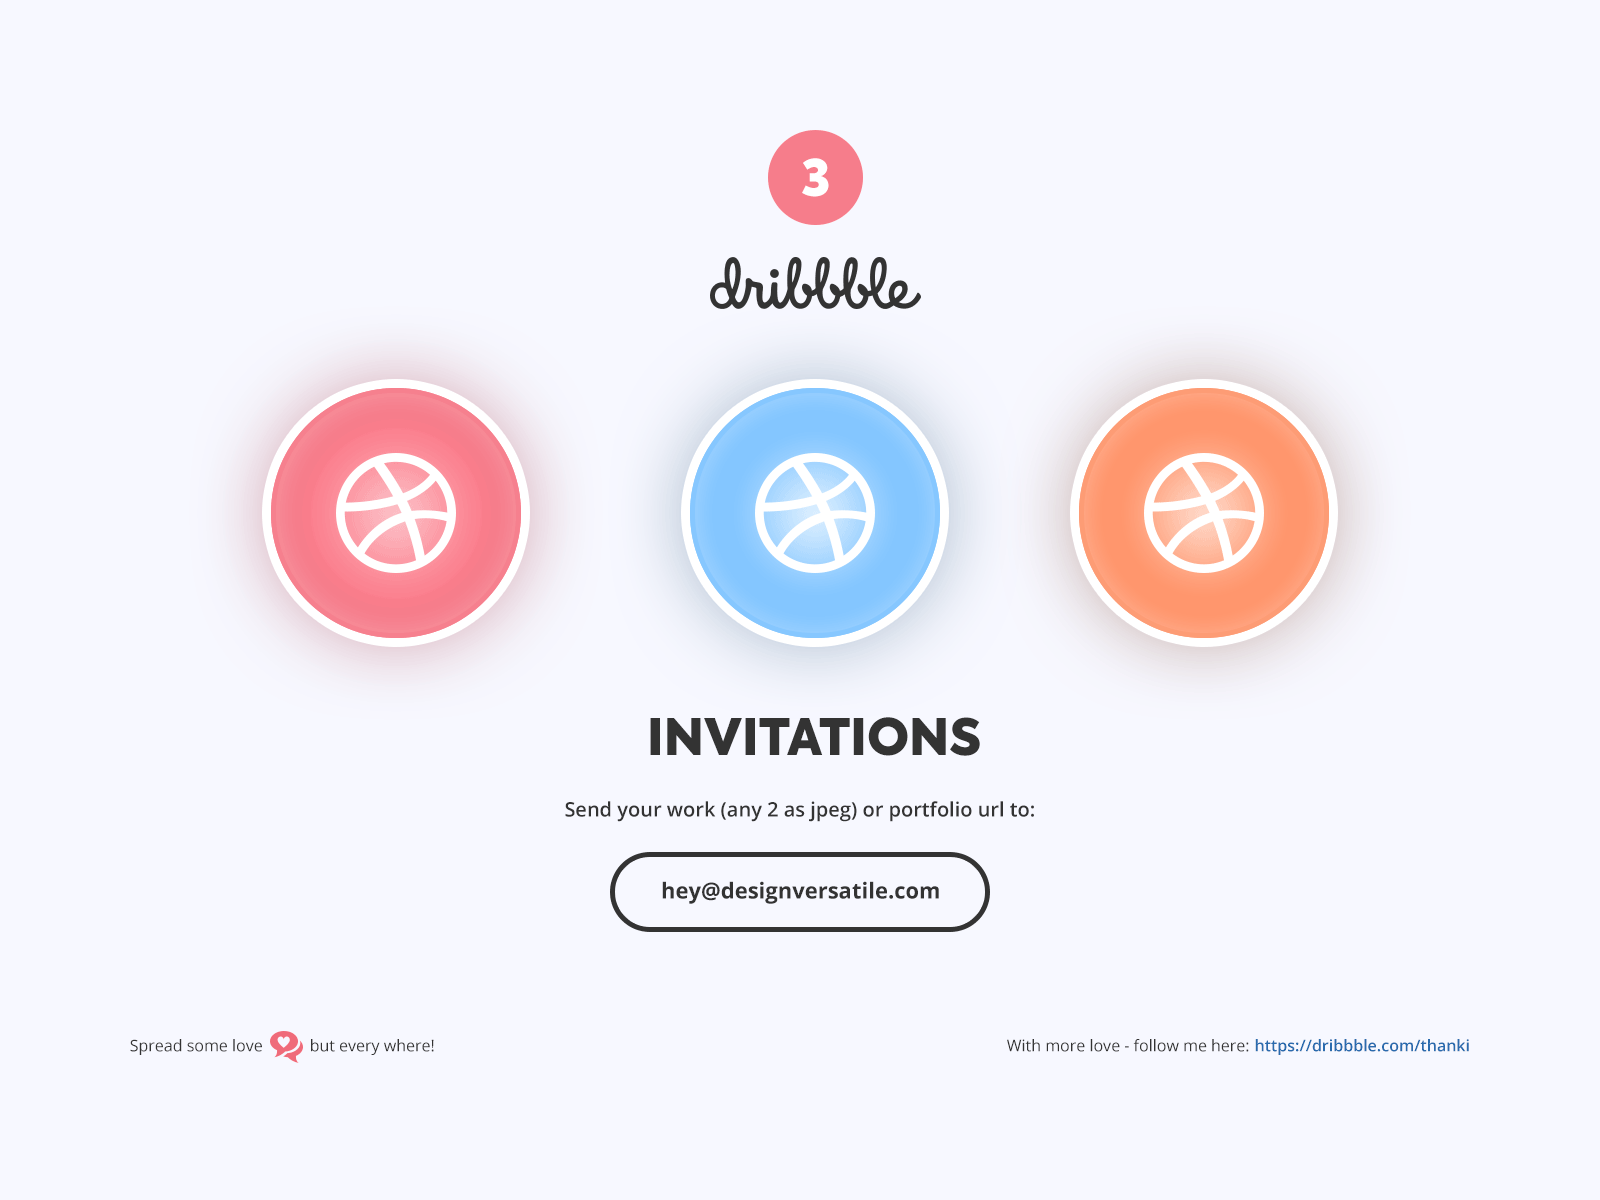 3 Dribbble Invitations to grab from me!